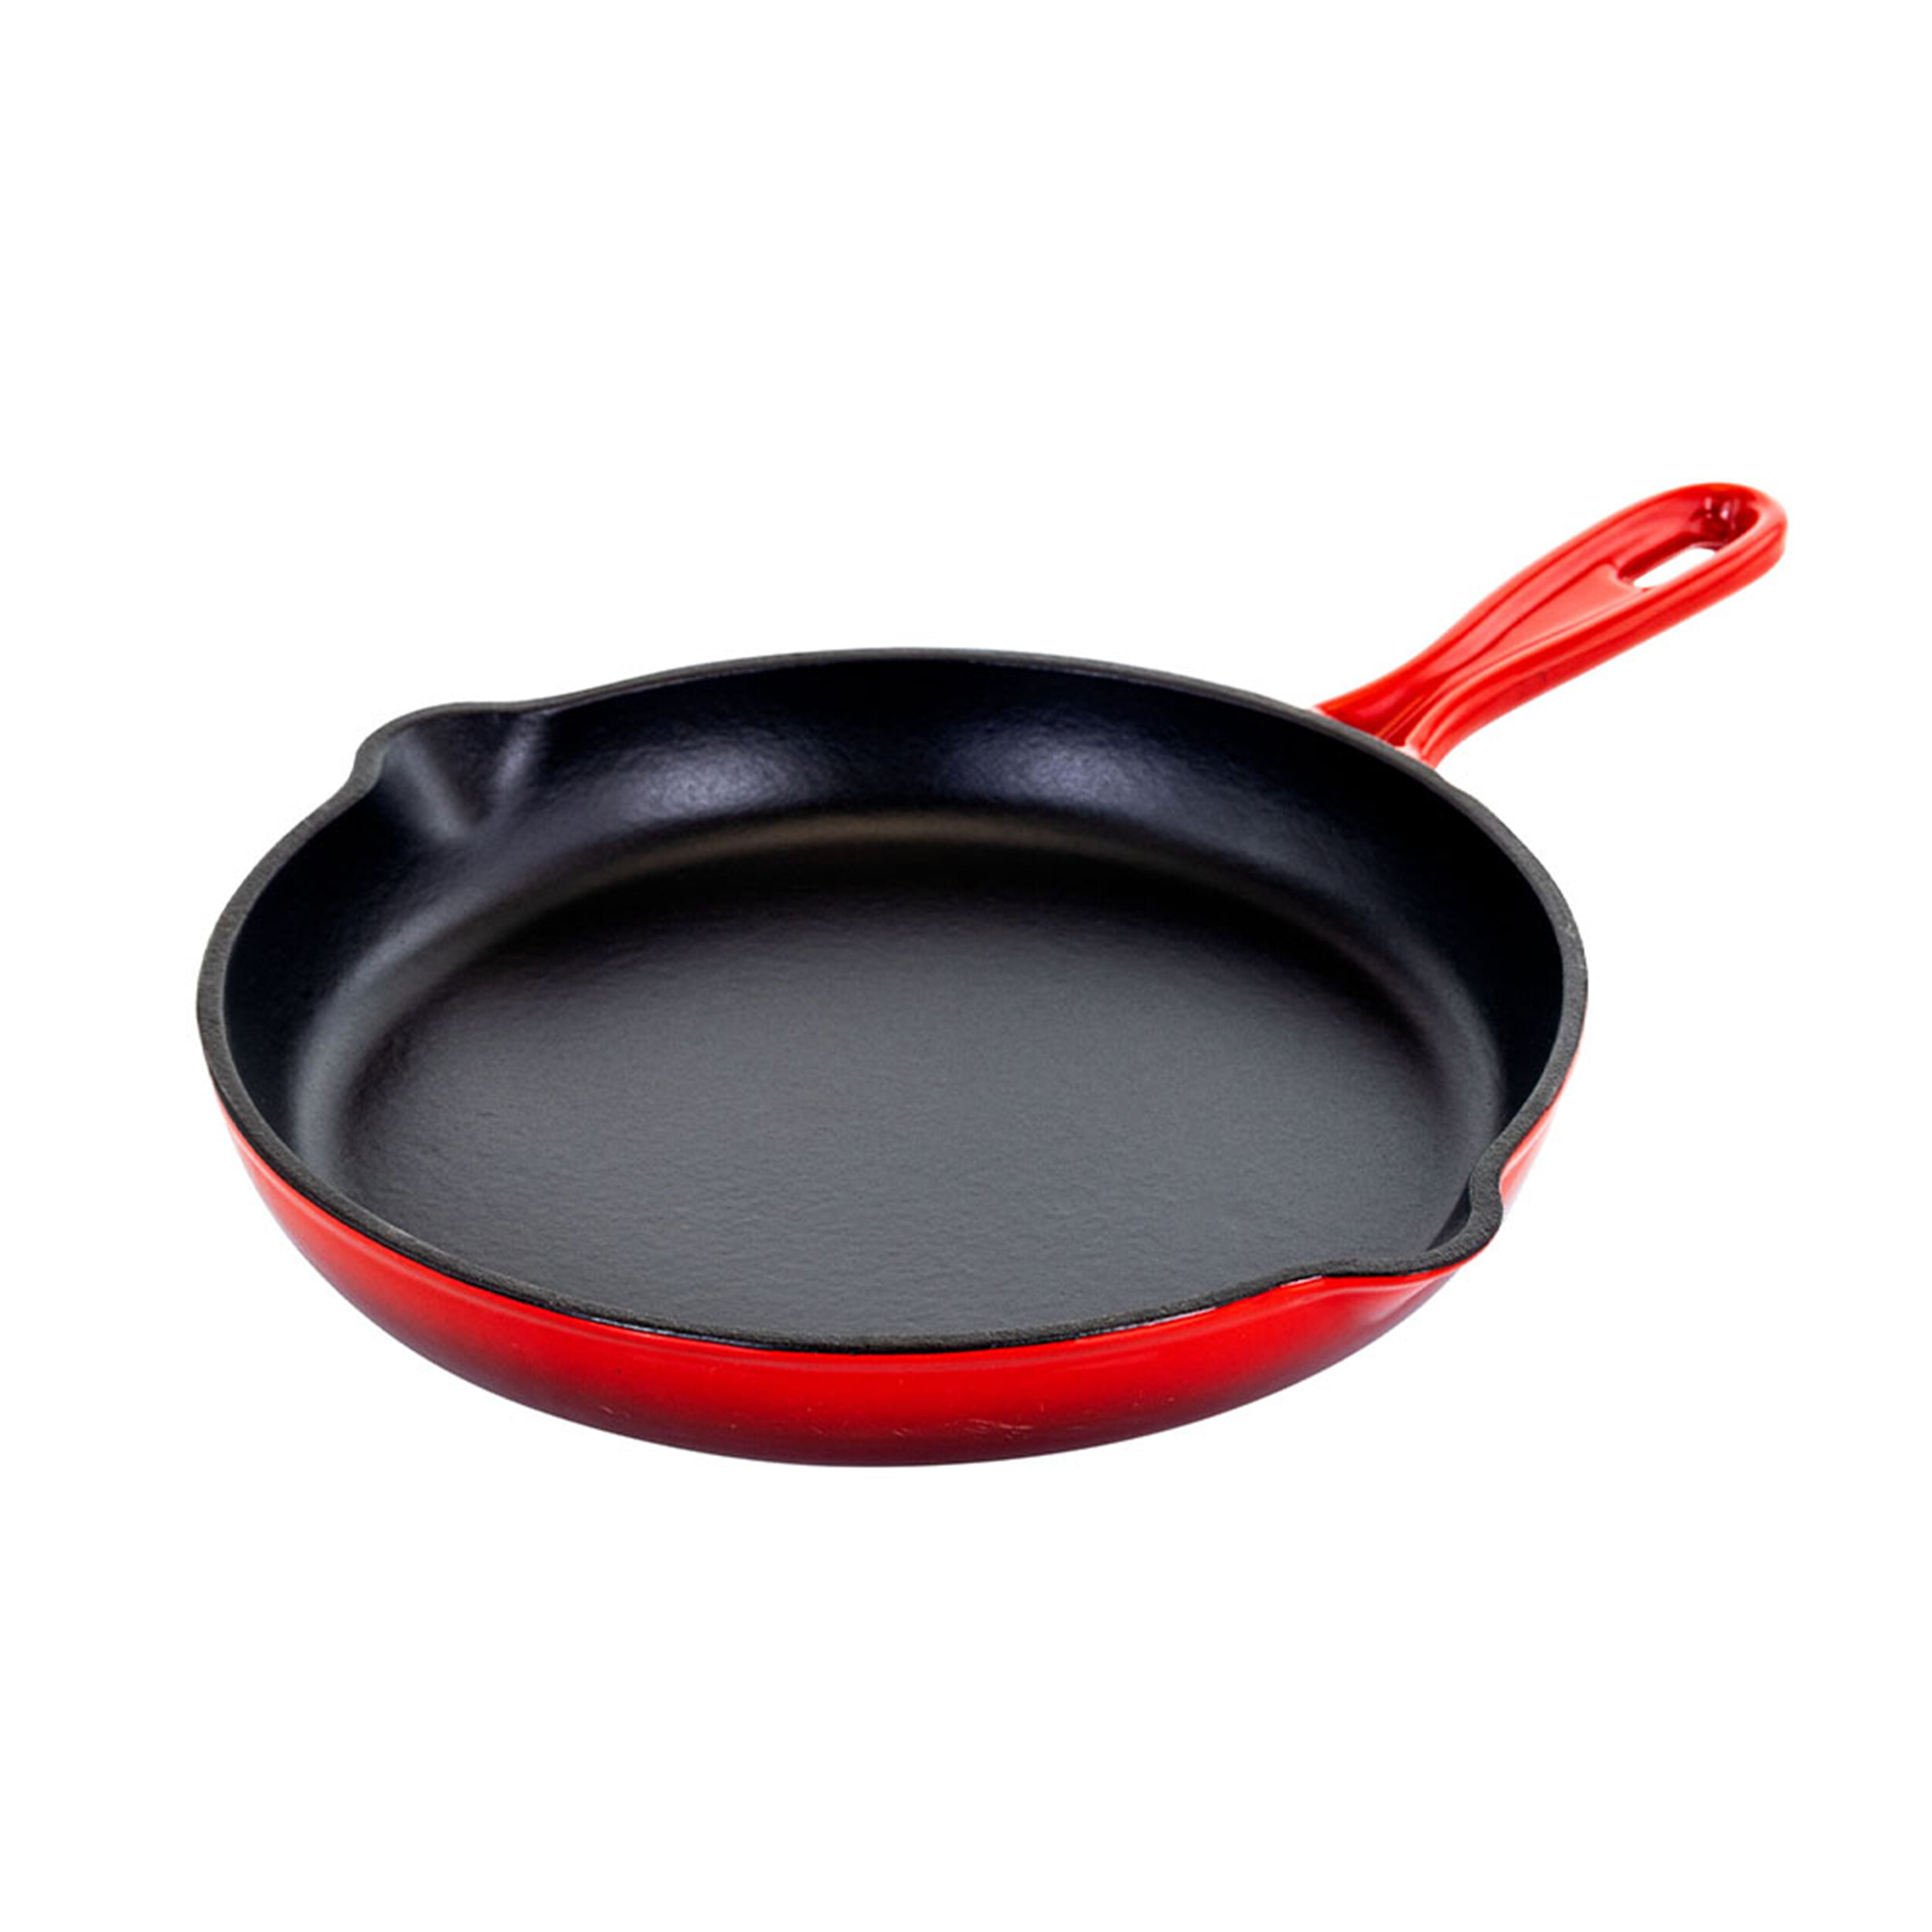 Chef Enamel 12-Inch Saute Pan with Lid